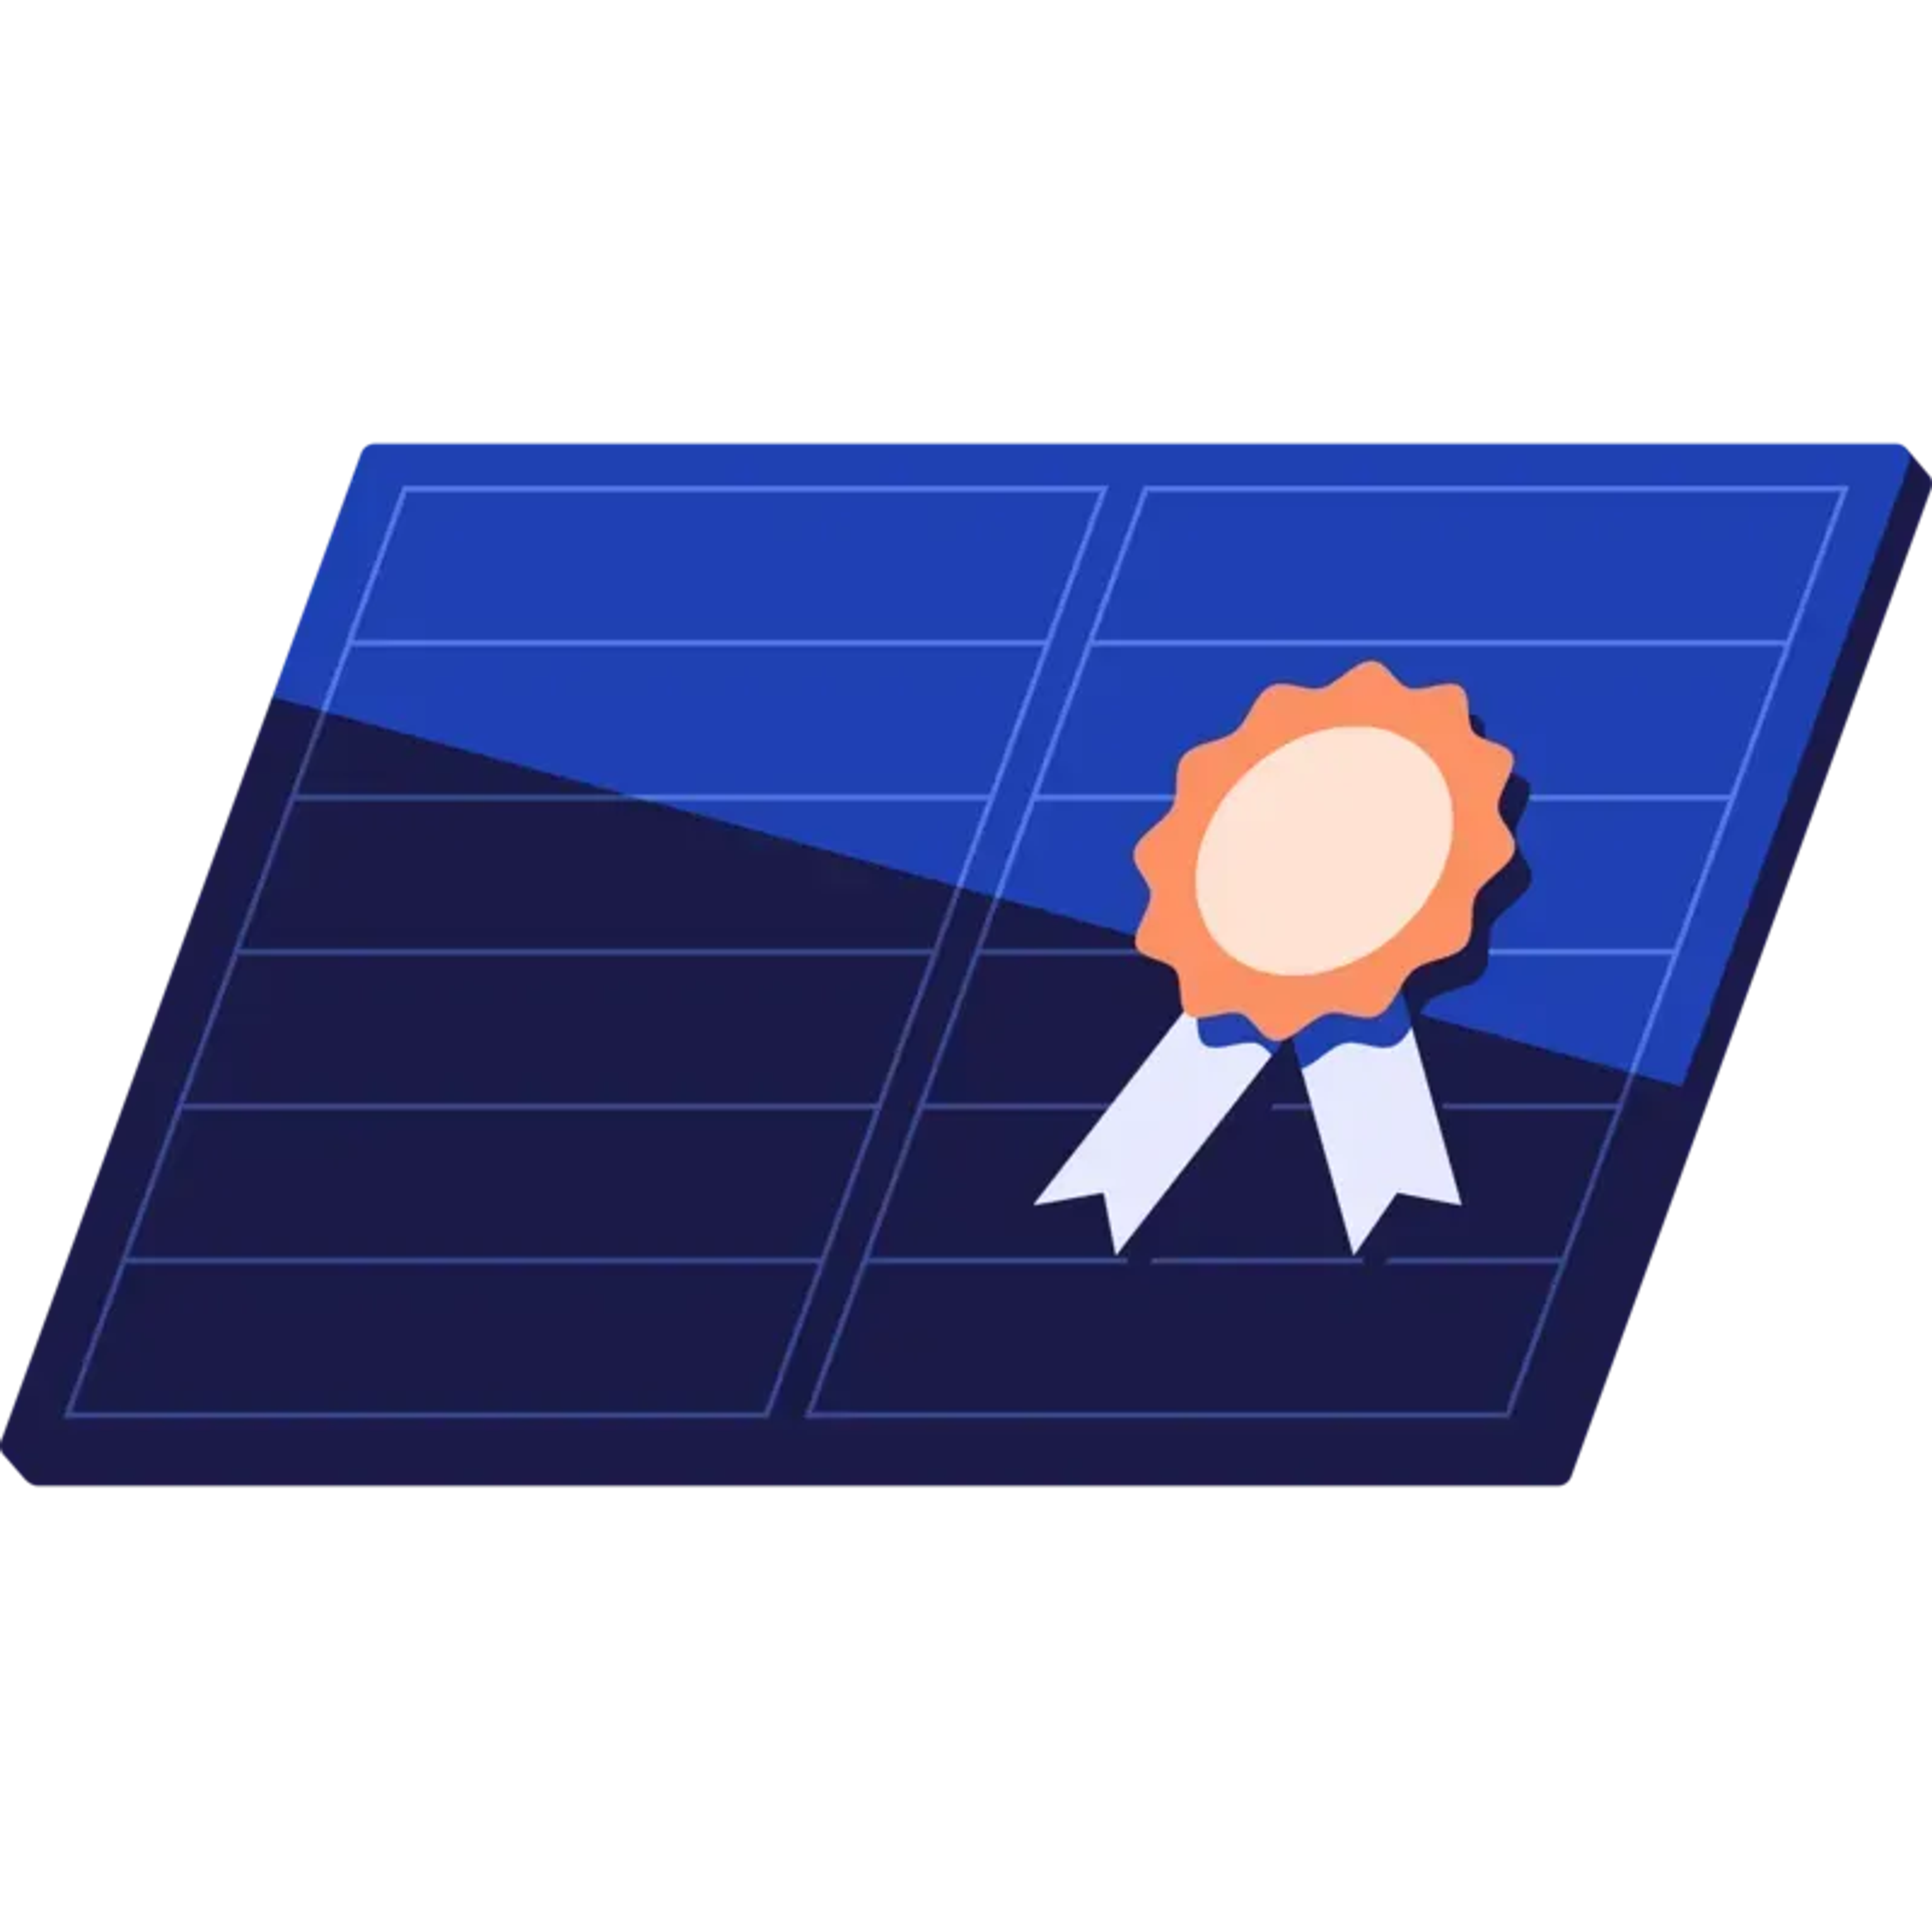 Solar panel with a medal